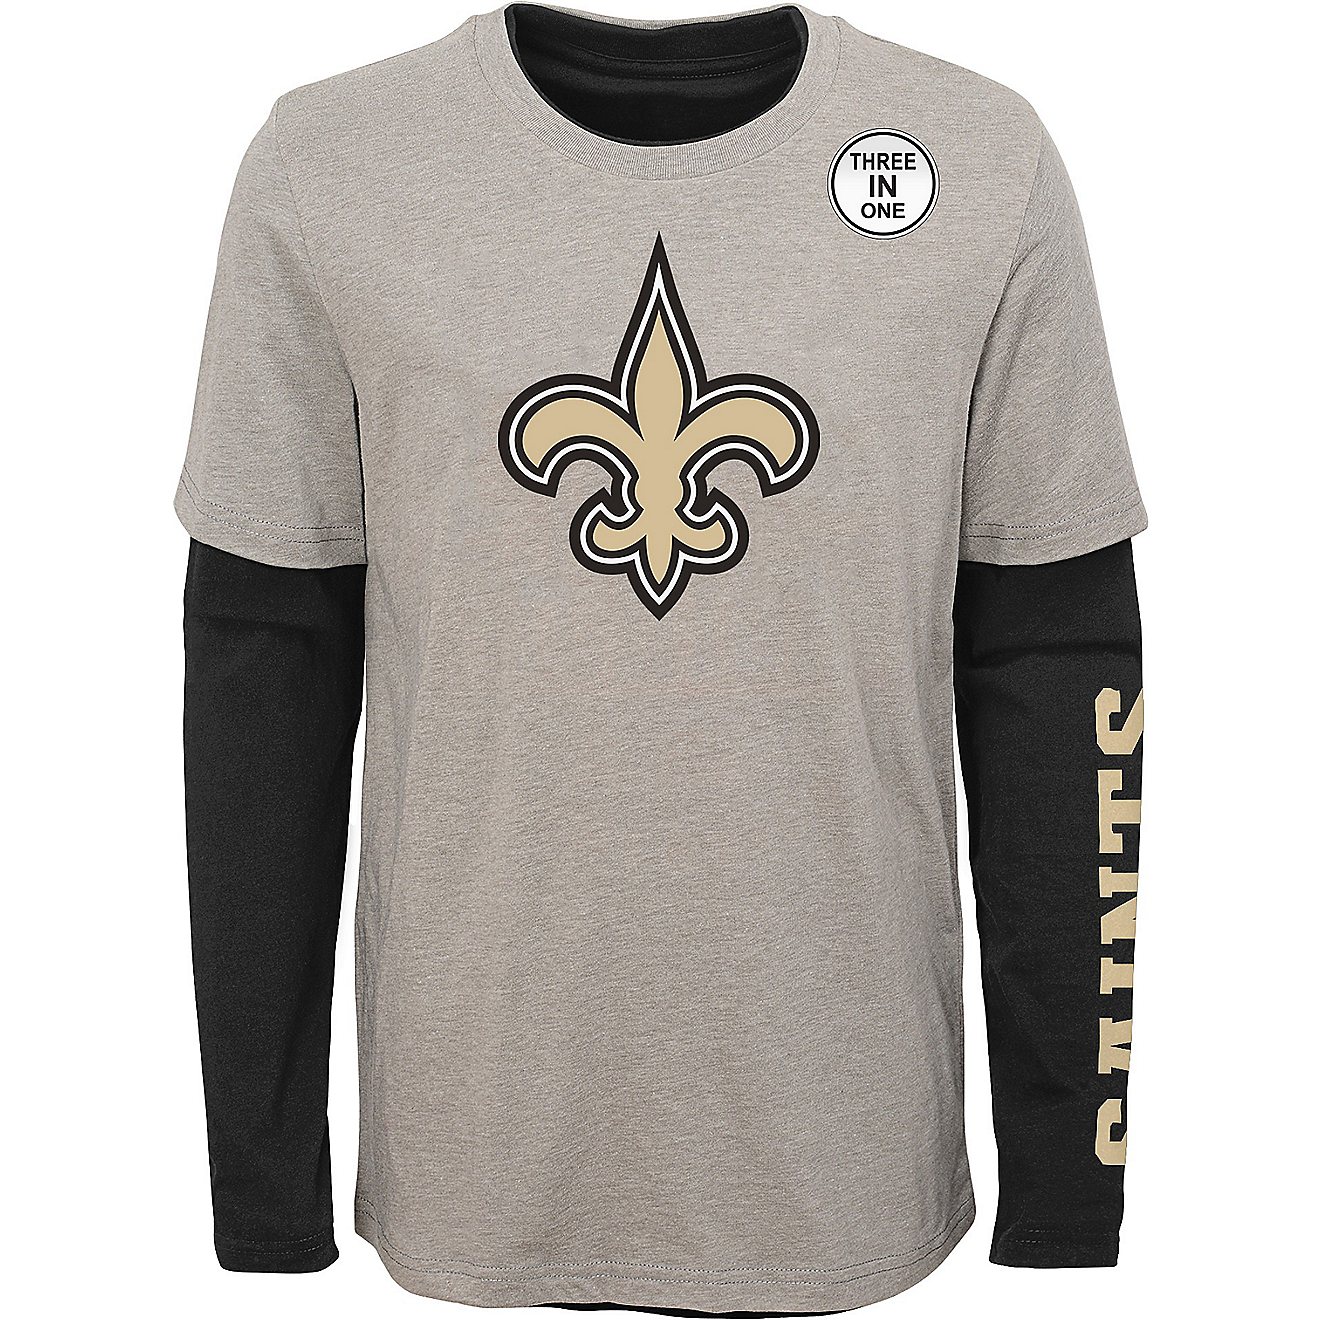 NFL Boys' 4-7 New Orleans Saints Goal Line Stand 3-in-1 T-shirt Combo                                                            - view number 3